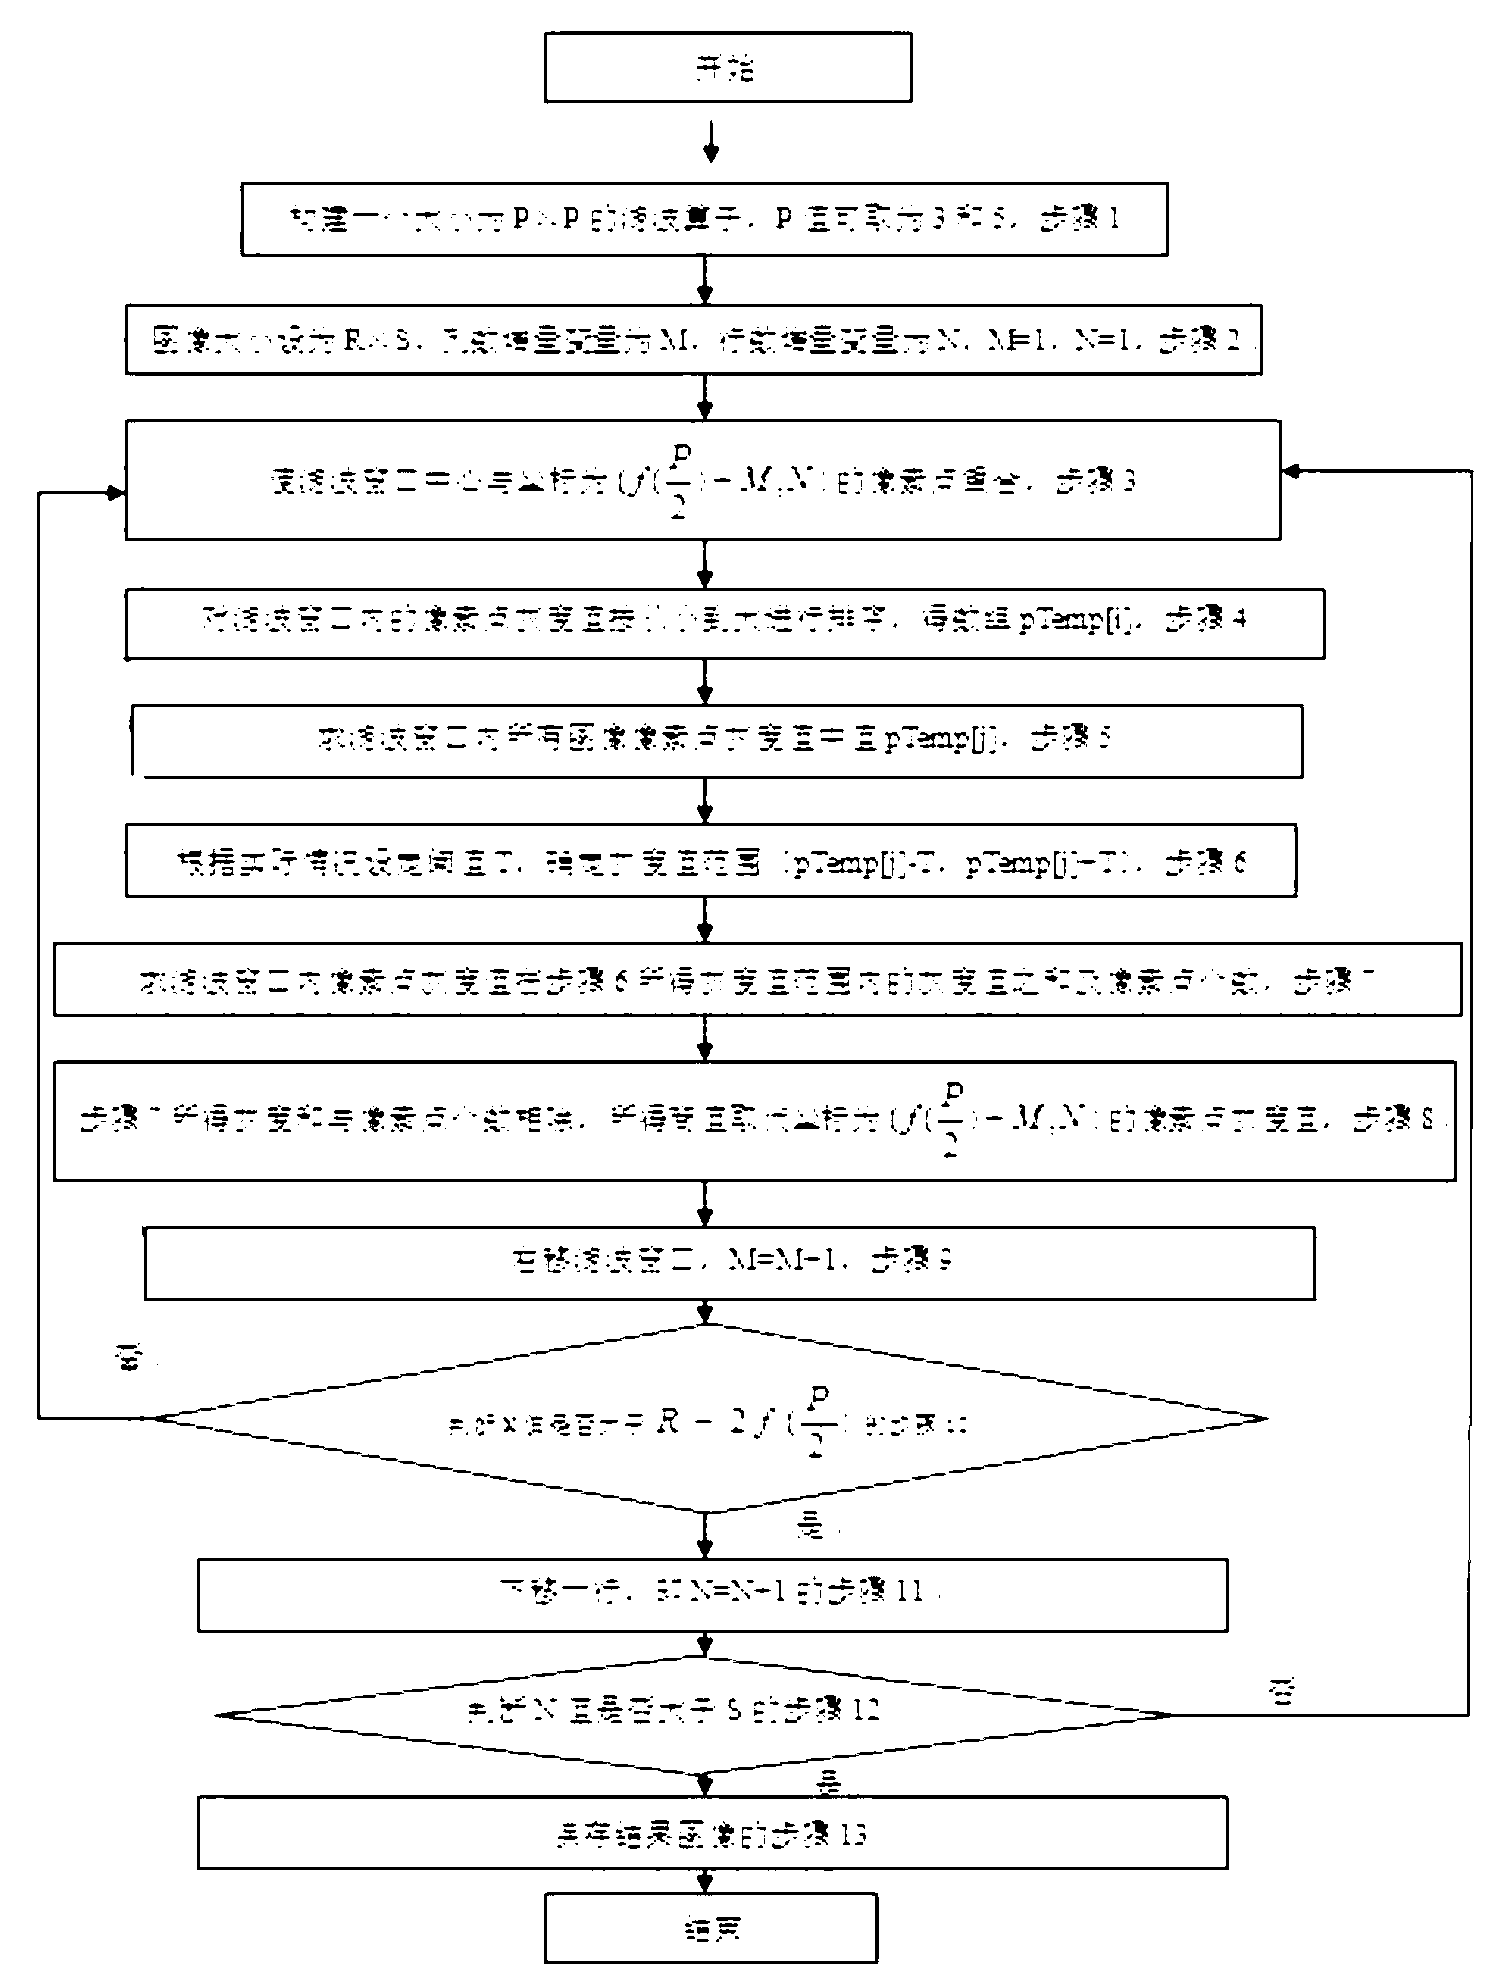 Image processing method for filtering mixed noise